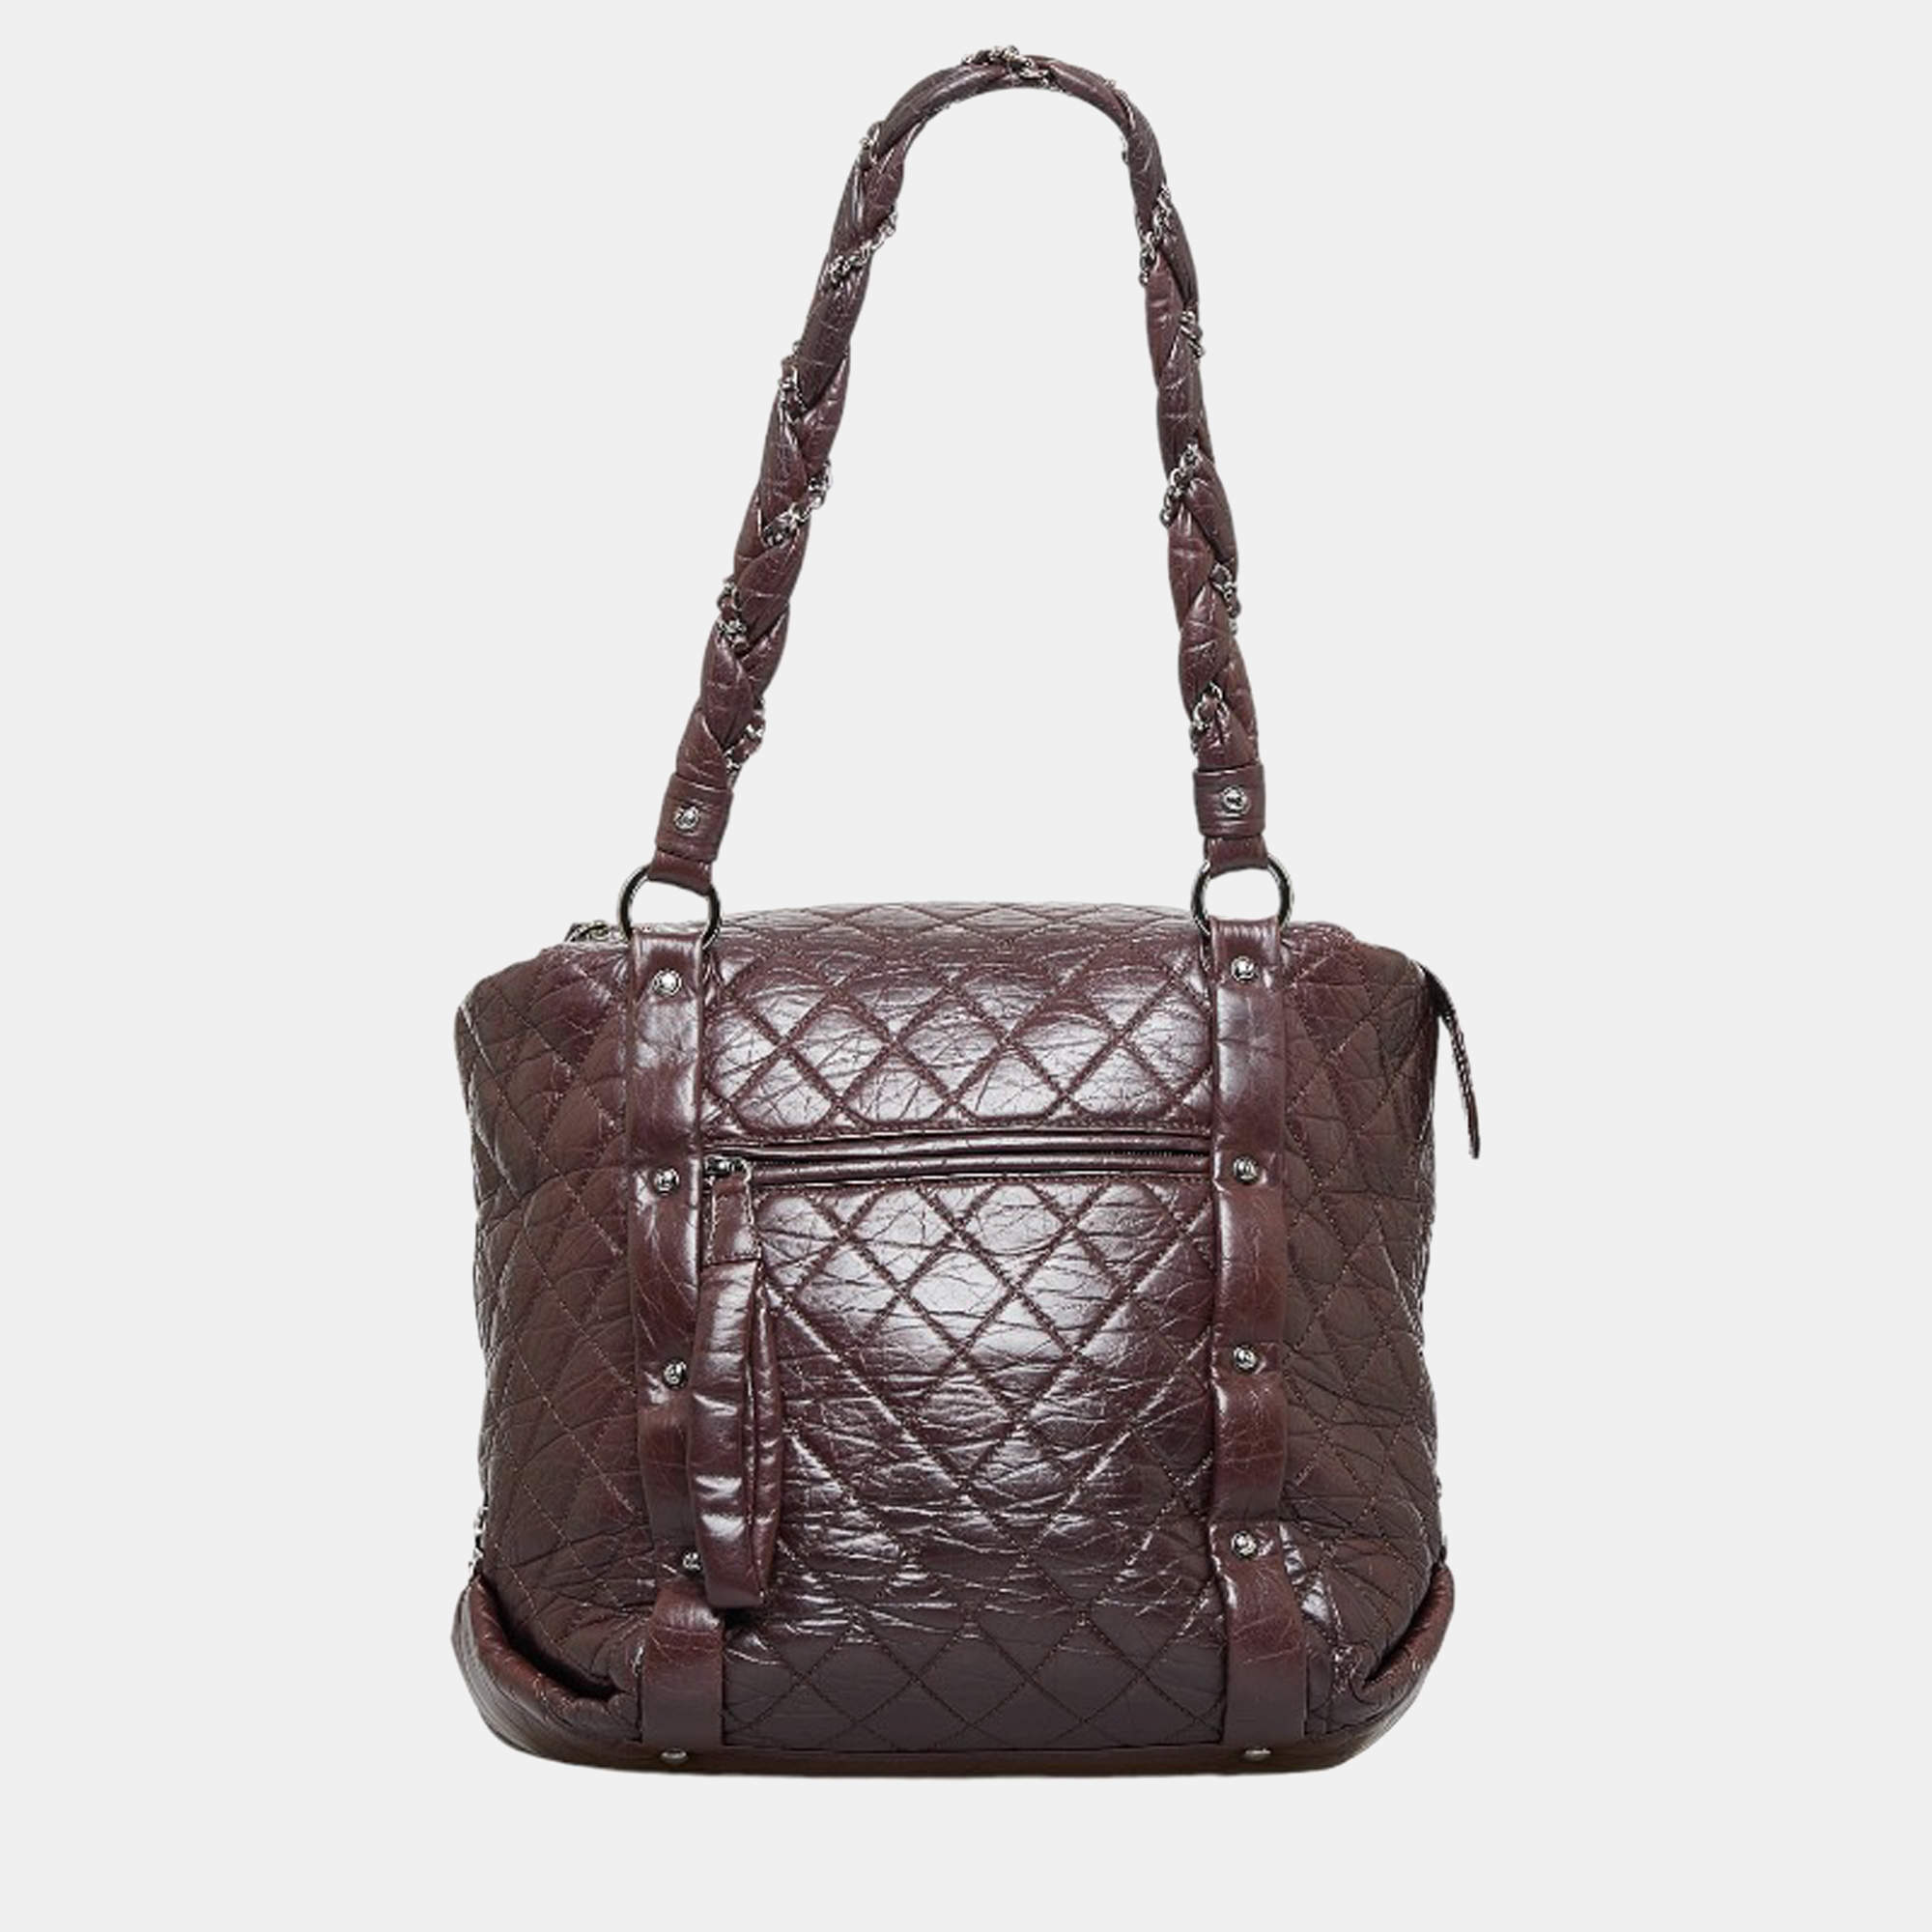 Chanel Brown Animal skin Quilted Leather Lady Braid Tote Tote Bag Chanel